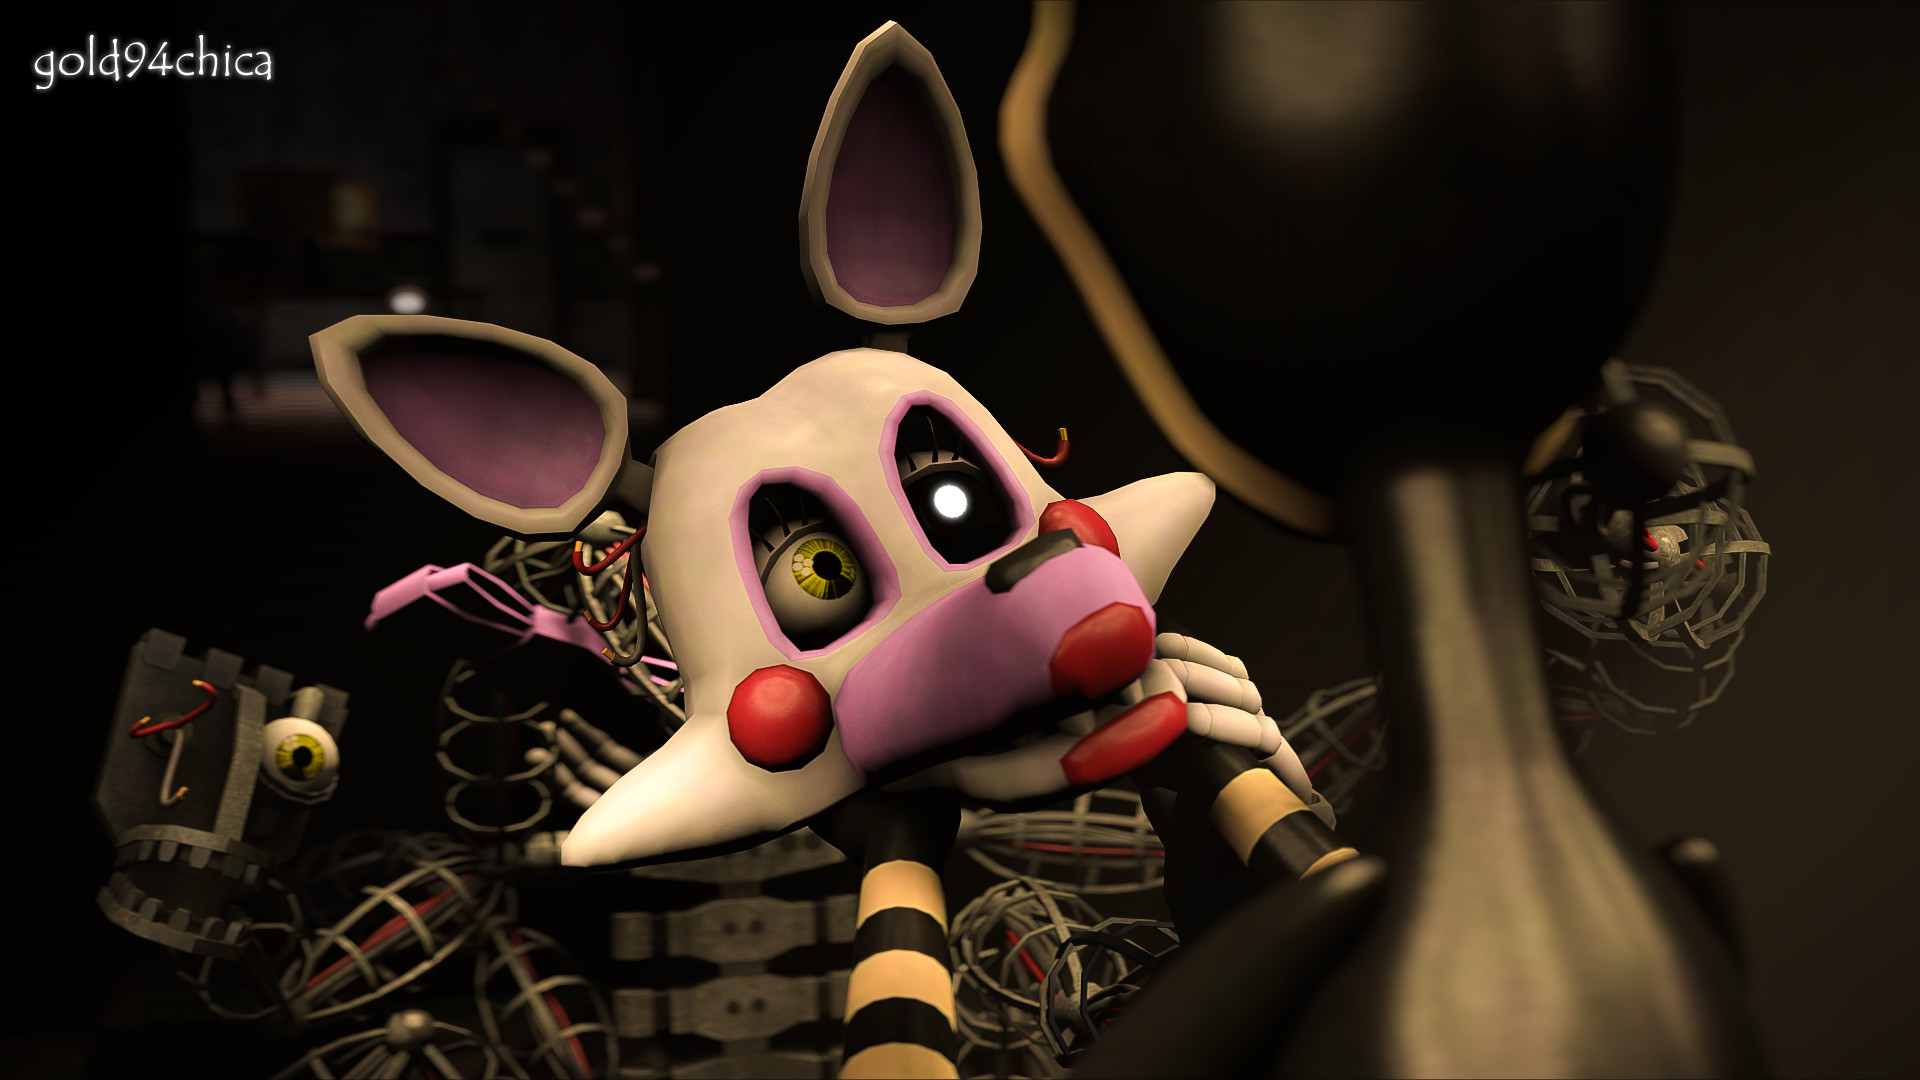 Five Nights at Freddys Wallpapers.